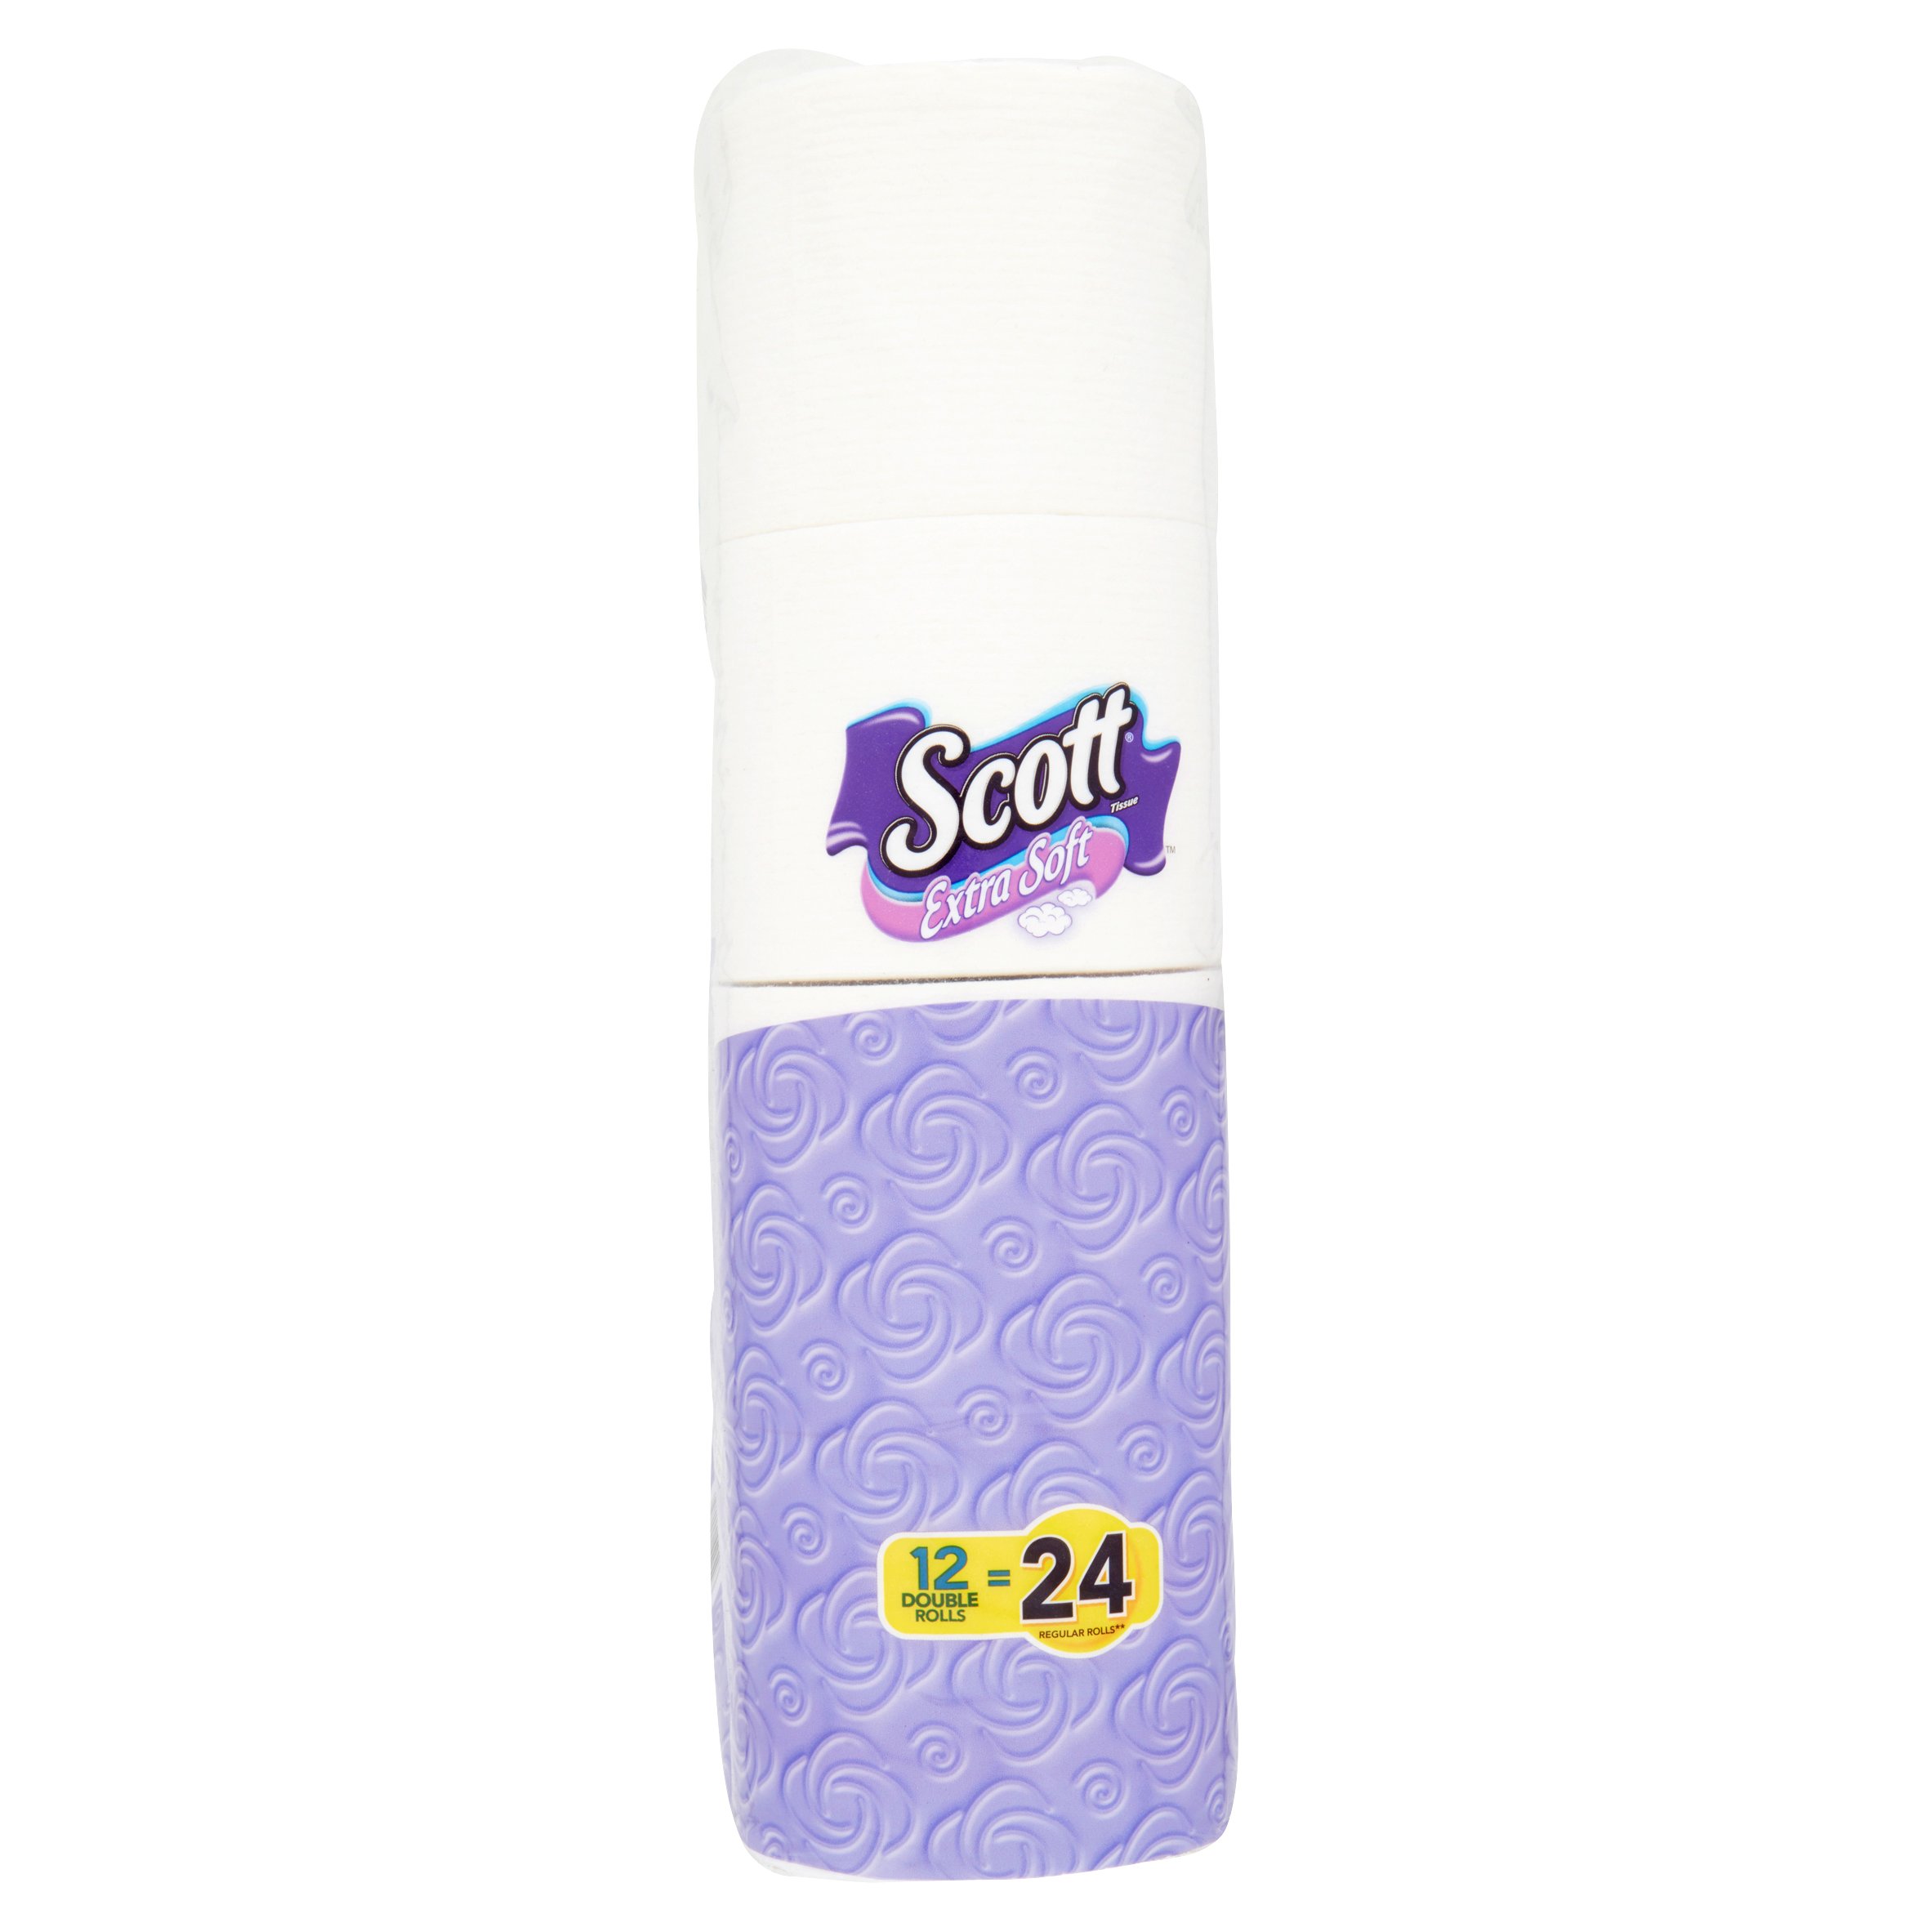 Scott Toilet Paper, Extra Soft, 12 Double Rolls - image 3 of 6